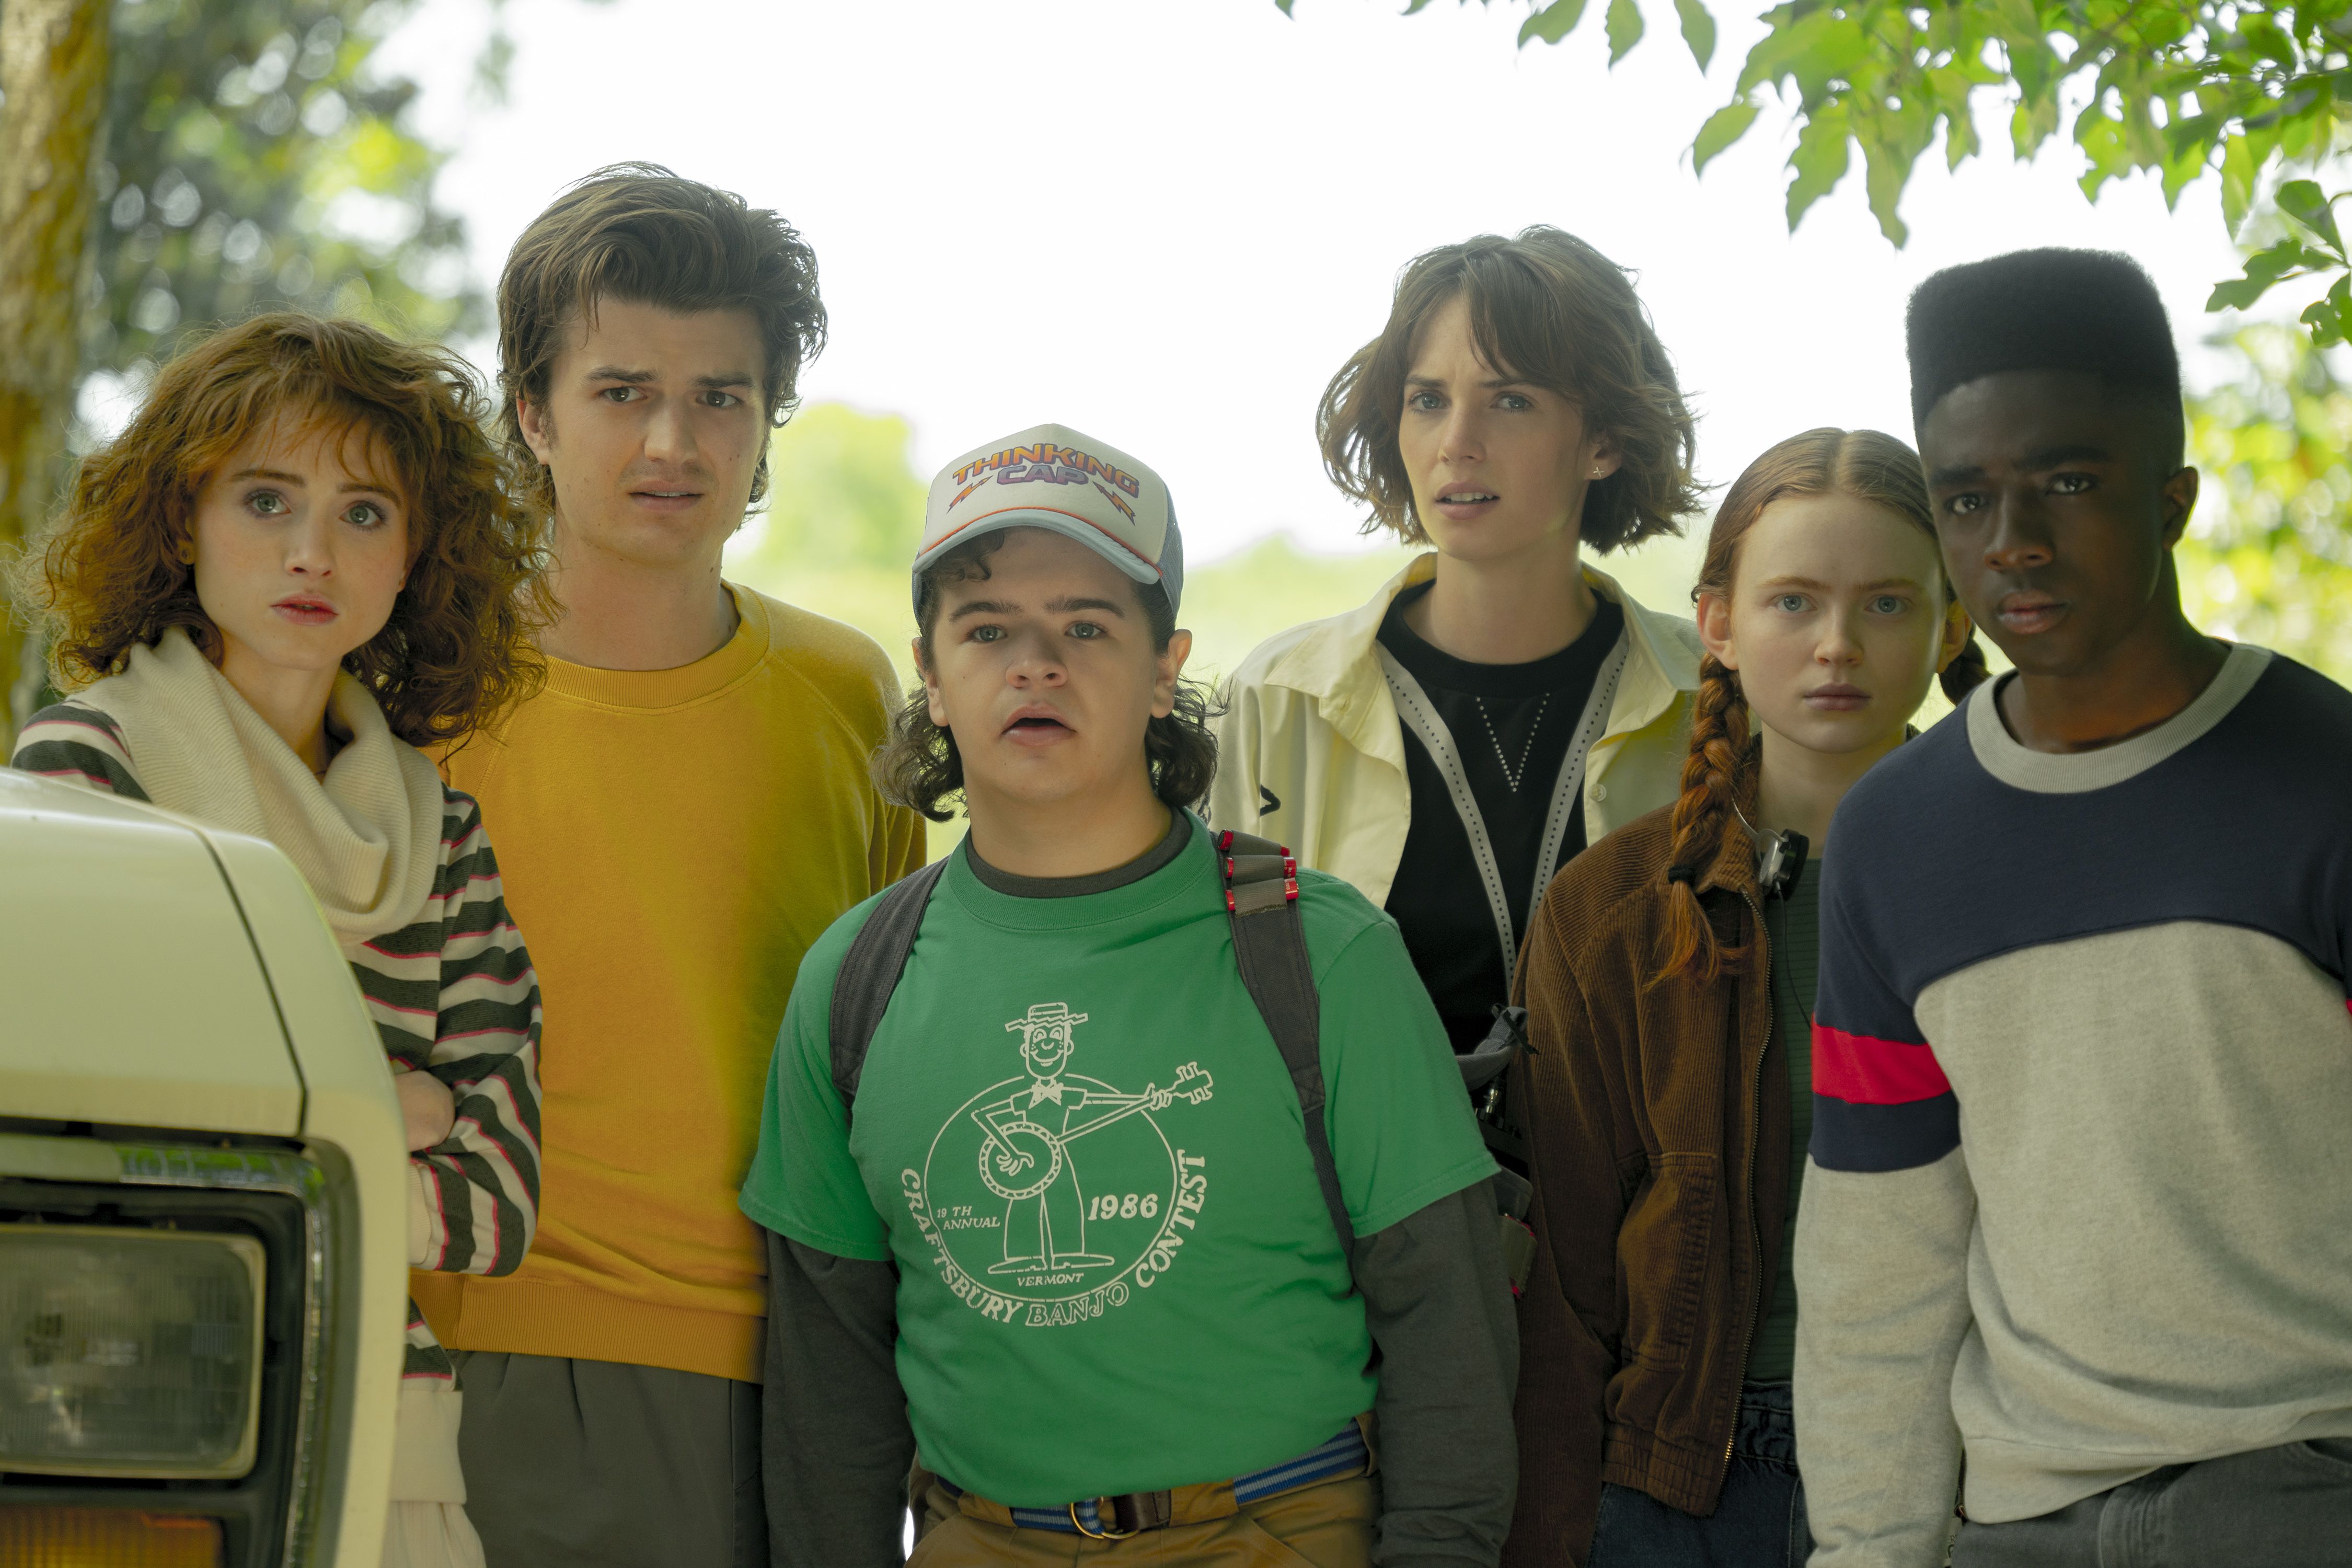 Stranger Things Season 4 Volume 2: How Long Are the Last Two Episodes?